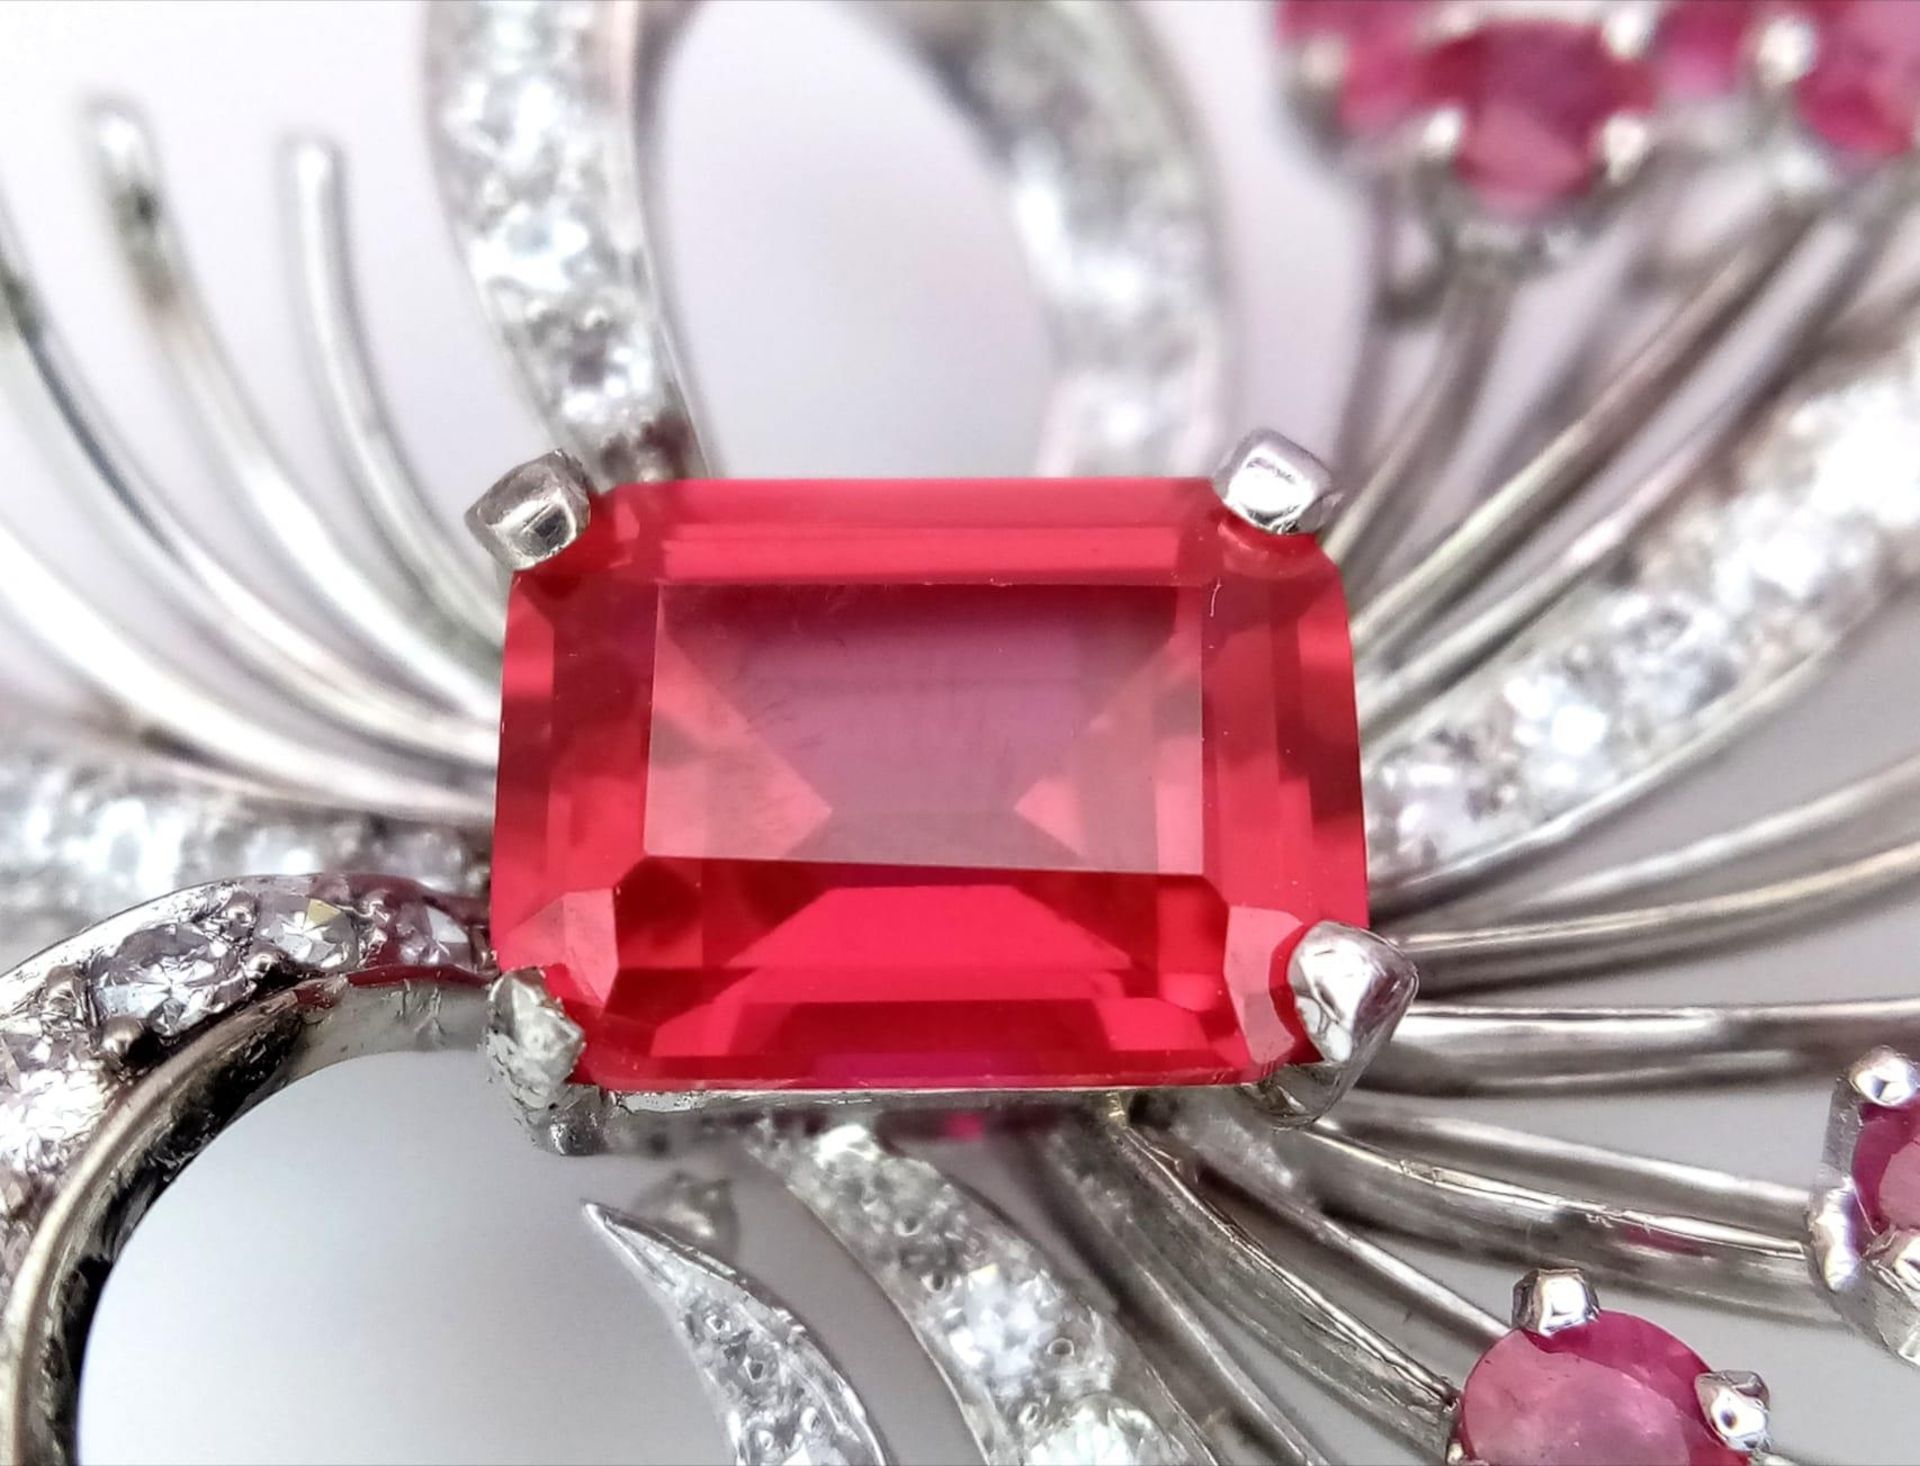 A STUNNING DIAMOND AND RUBY BROOCH SET IN PLATINUM , A MAJESTIC SPRAY OF RUBIES EMINATING FROM A - Image 4 of 7